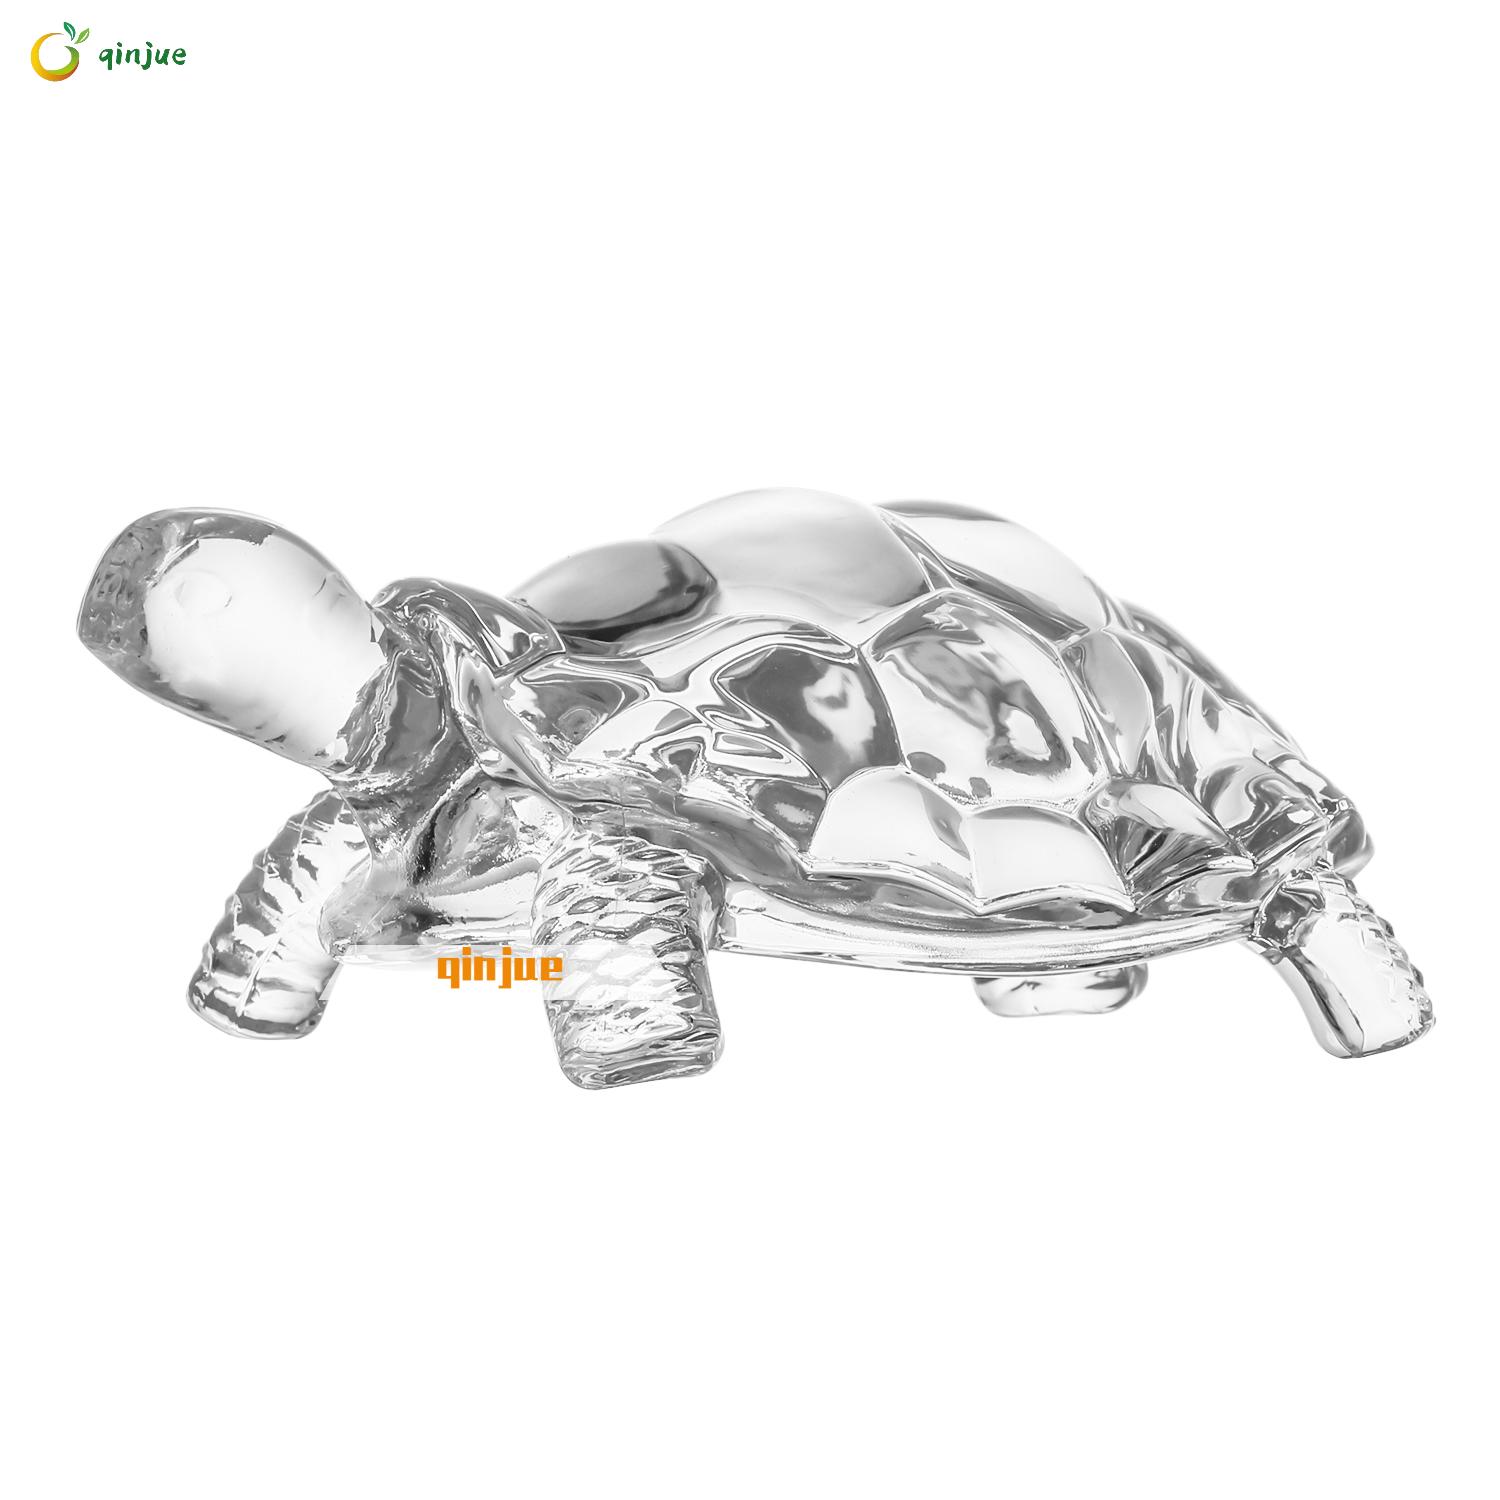 QINJUE Home Ornaments Gorgeous Crafts Figurines Glass Tortoise Gift Souvenirs for All Occasion Home Decorative Collectibles Handmade Art